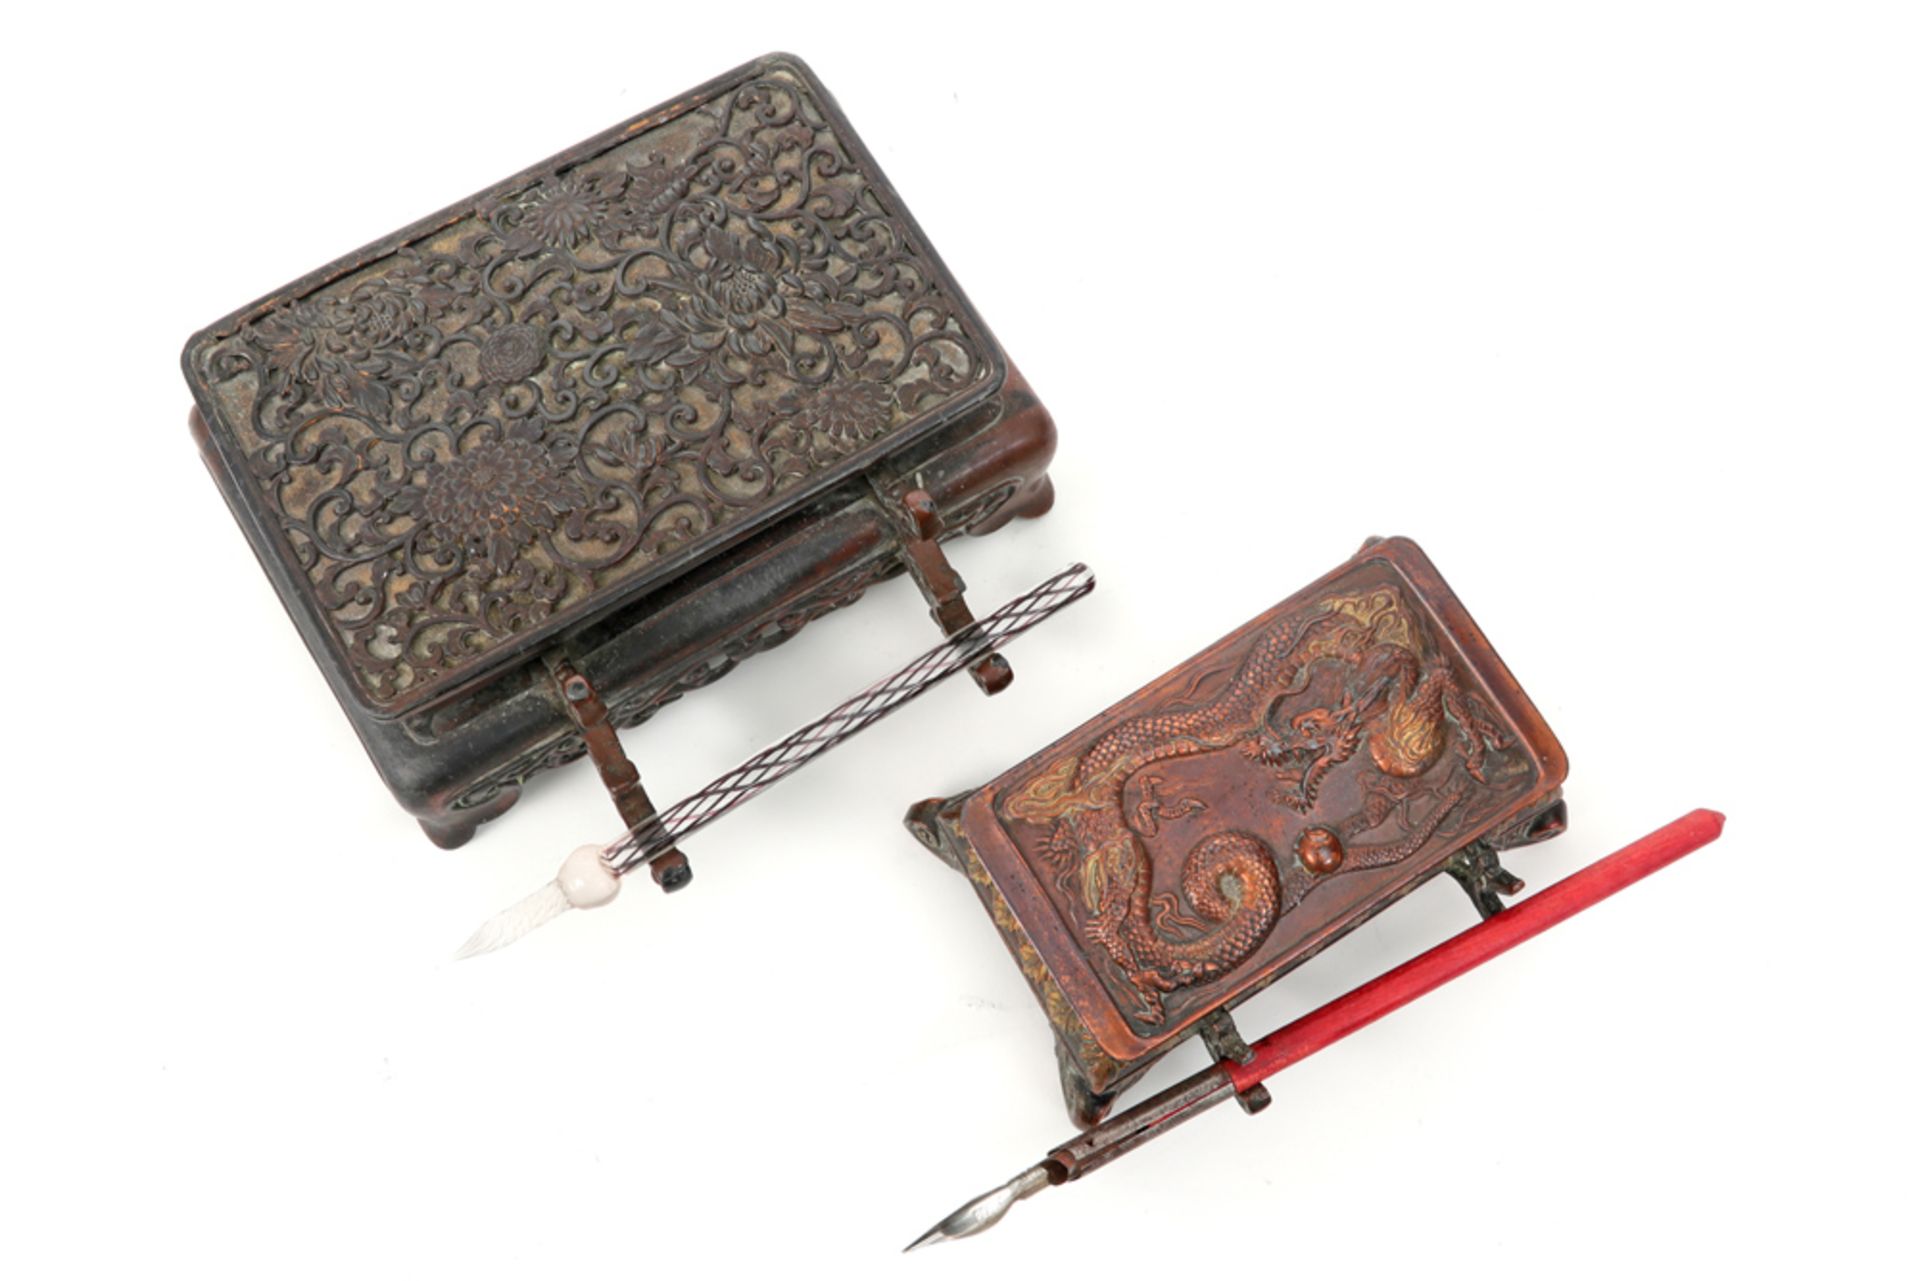 two antique Chinese style inkstands, one in gilded metal (with dragon decor) and one in bronze - Image 3 of 3